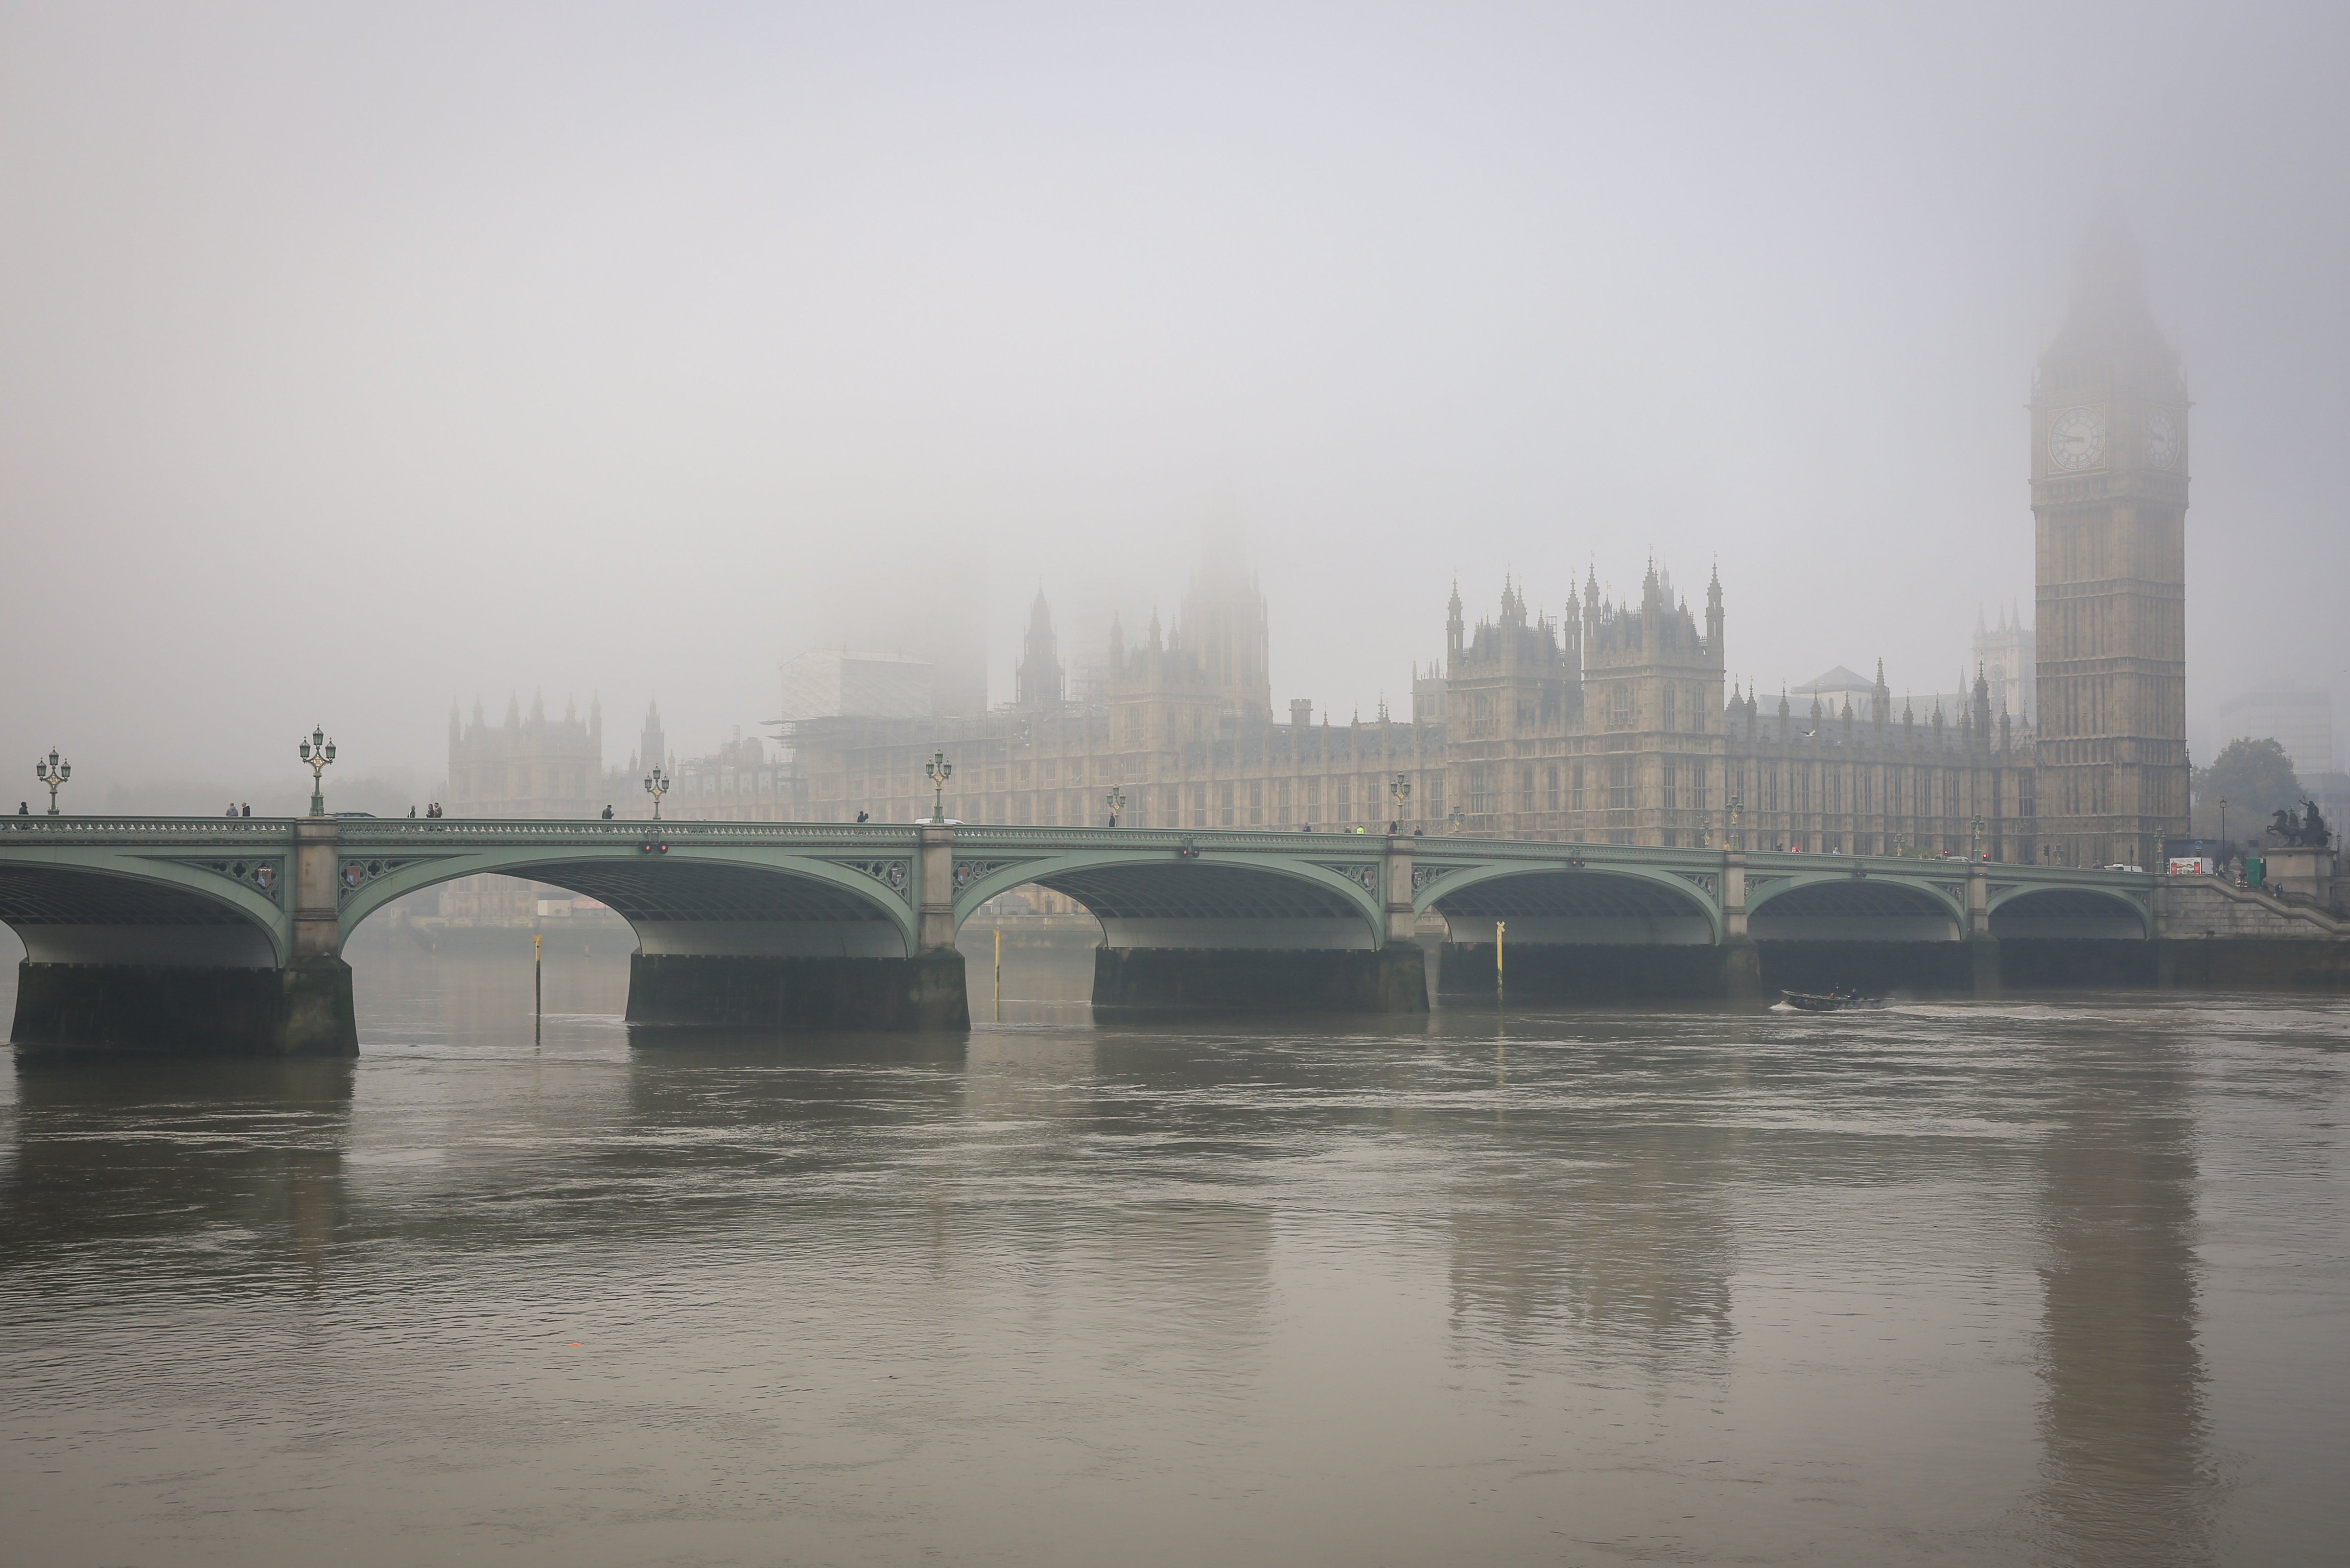 Big Ben and House of Parliament in London Fog (Bridget Davey—Getty Images/Moment Open)